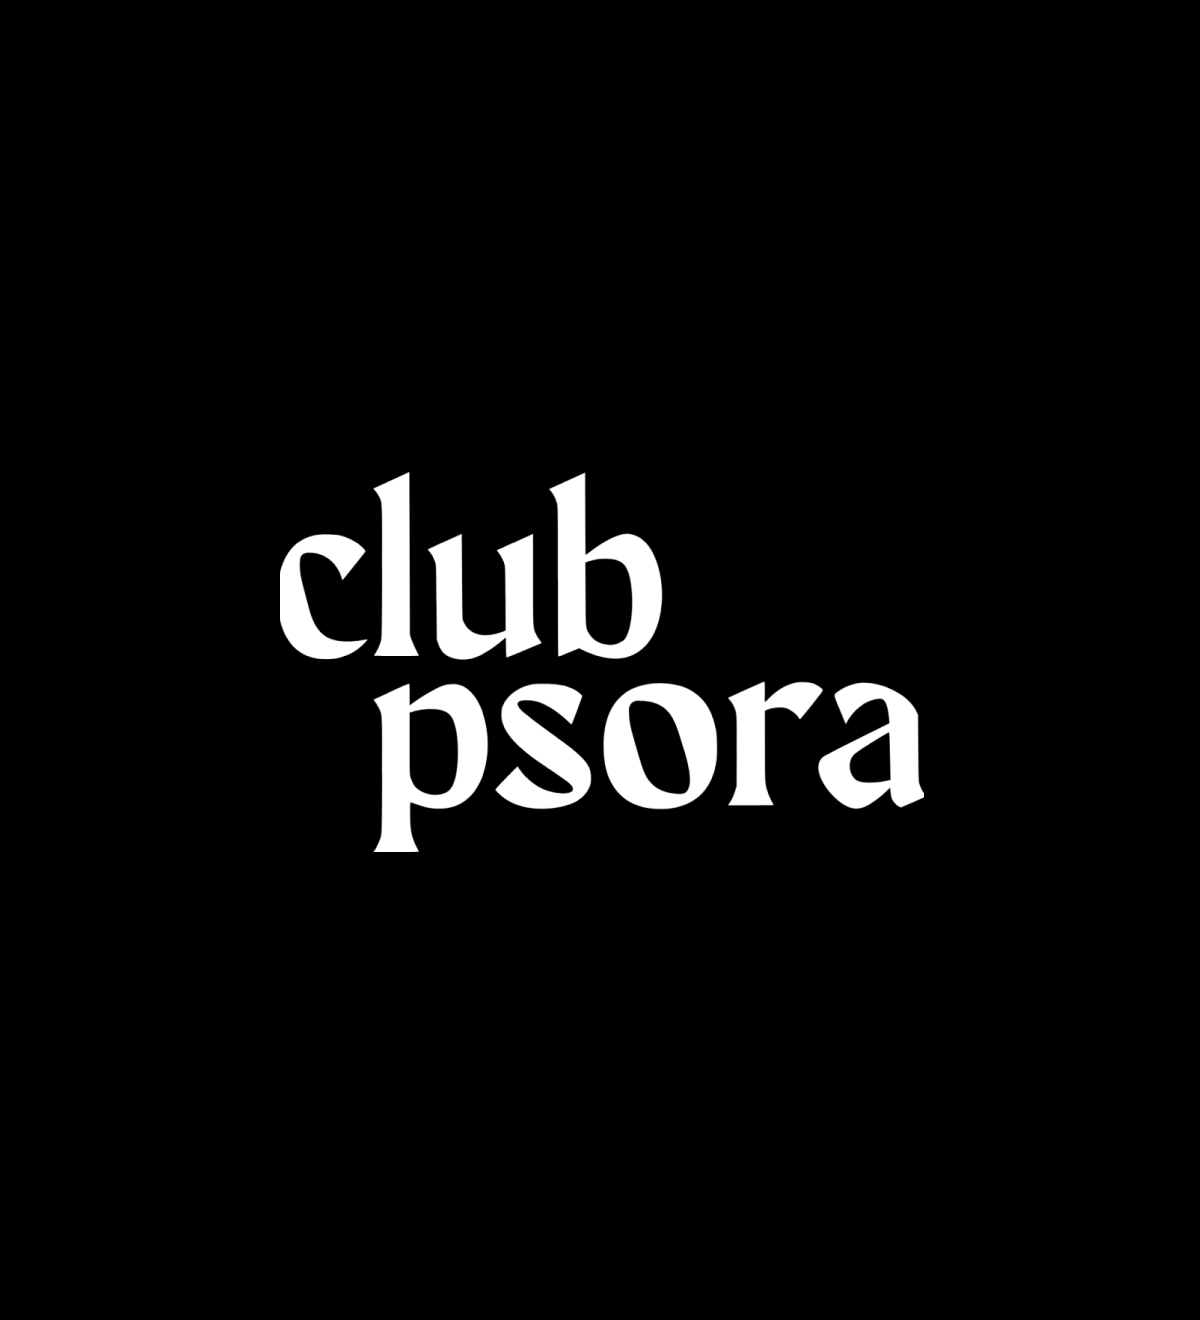 Club Psora review for SANOMADS